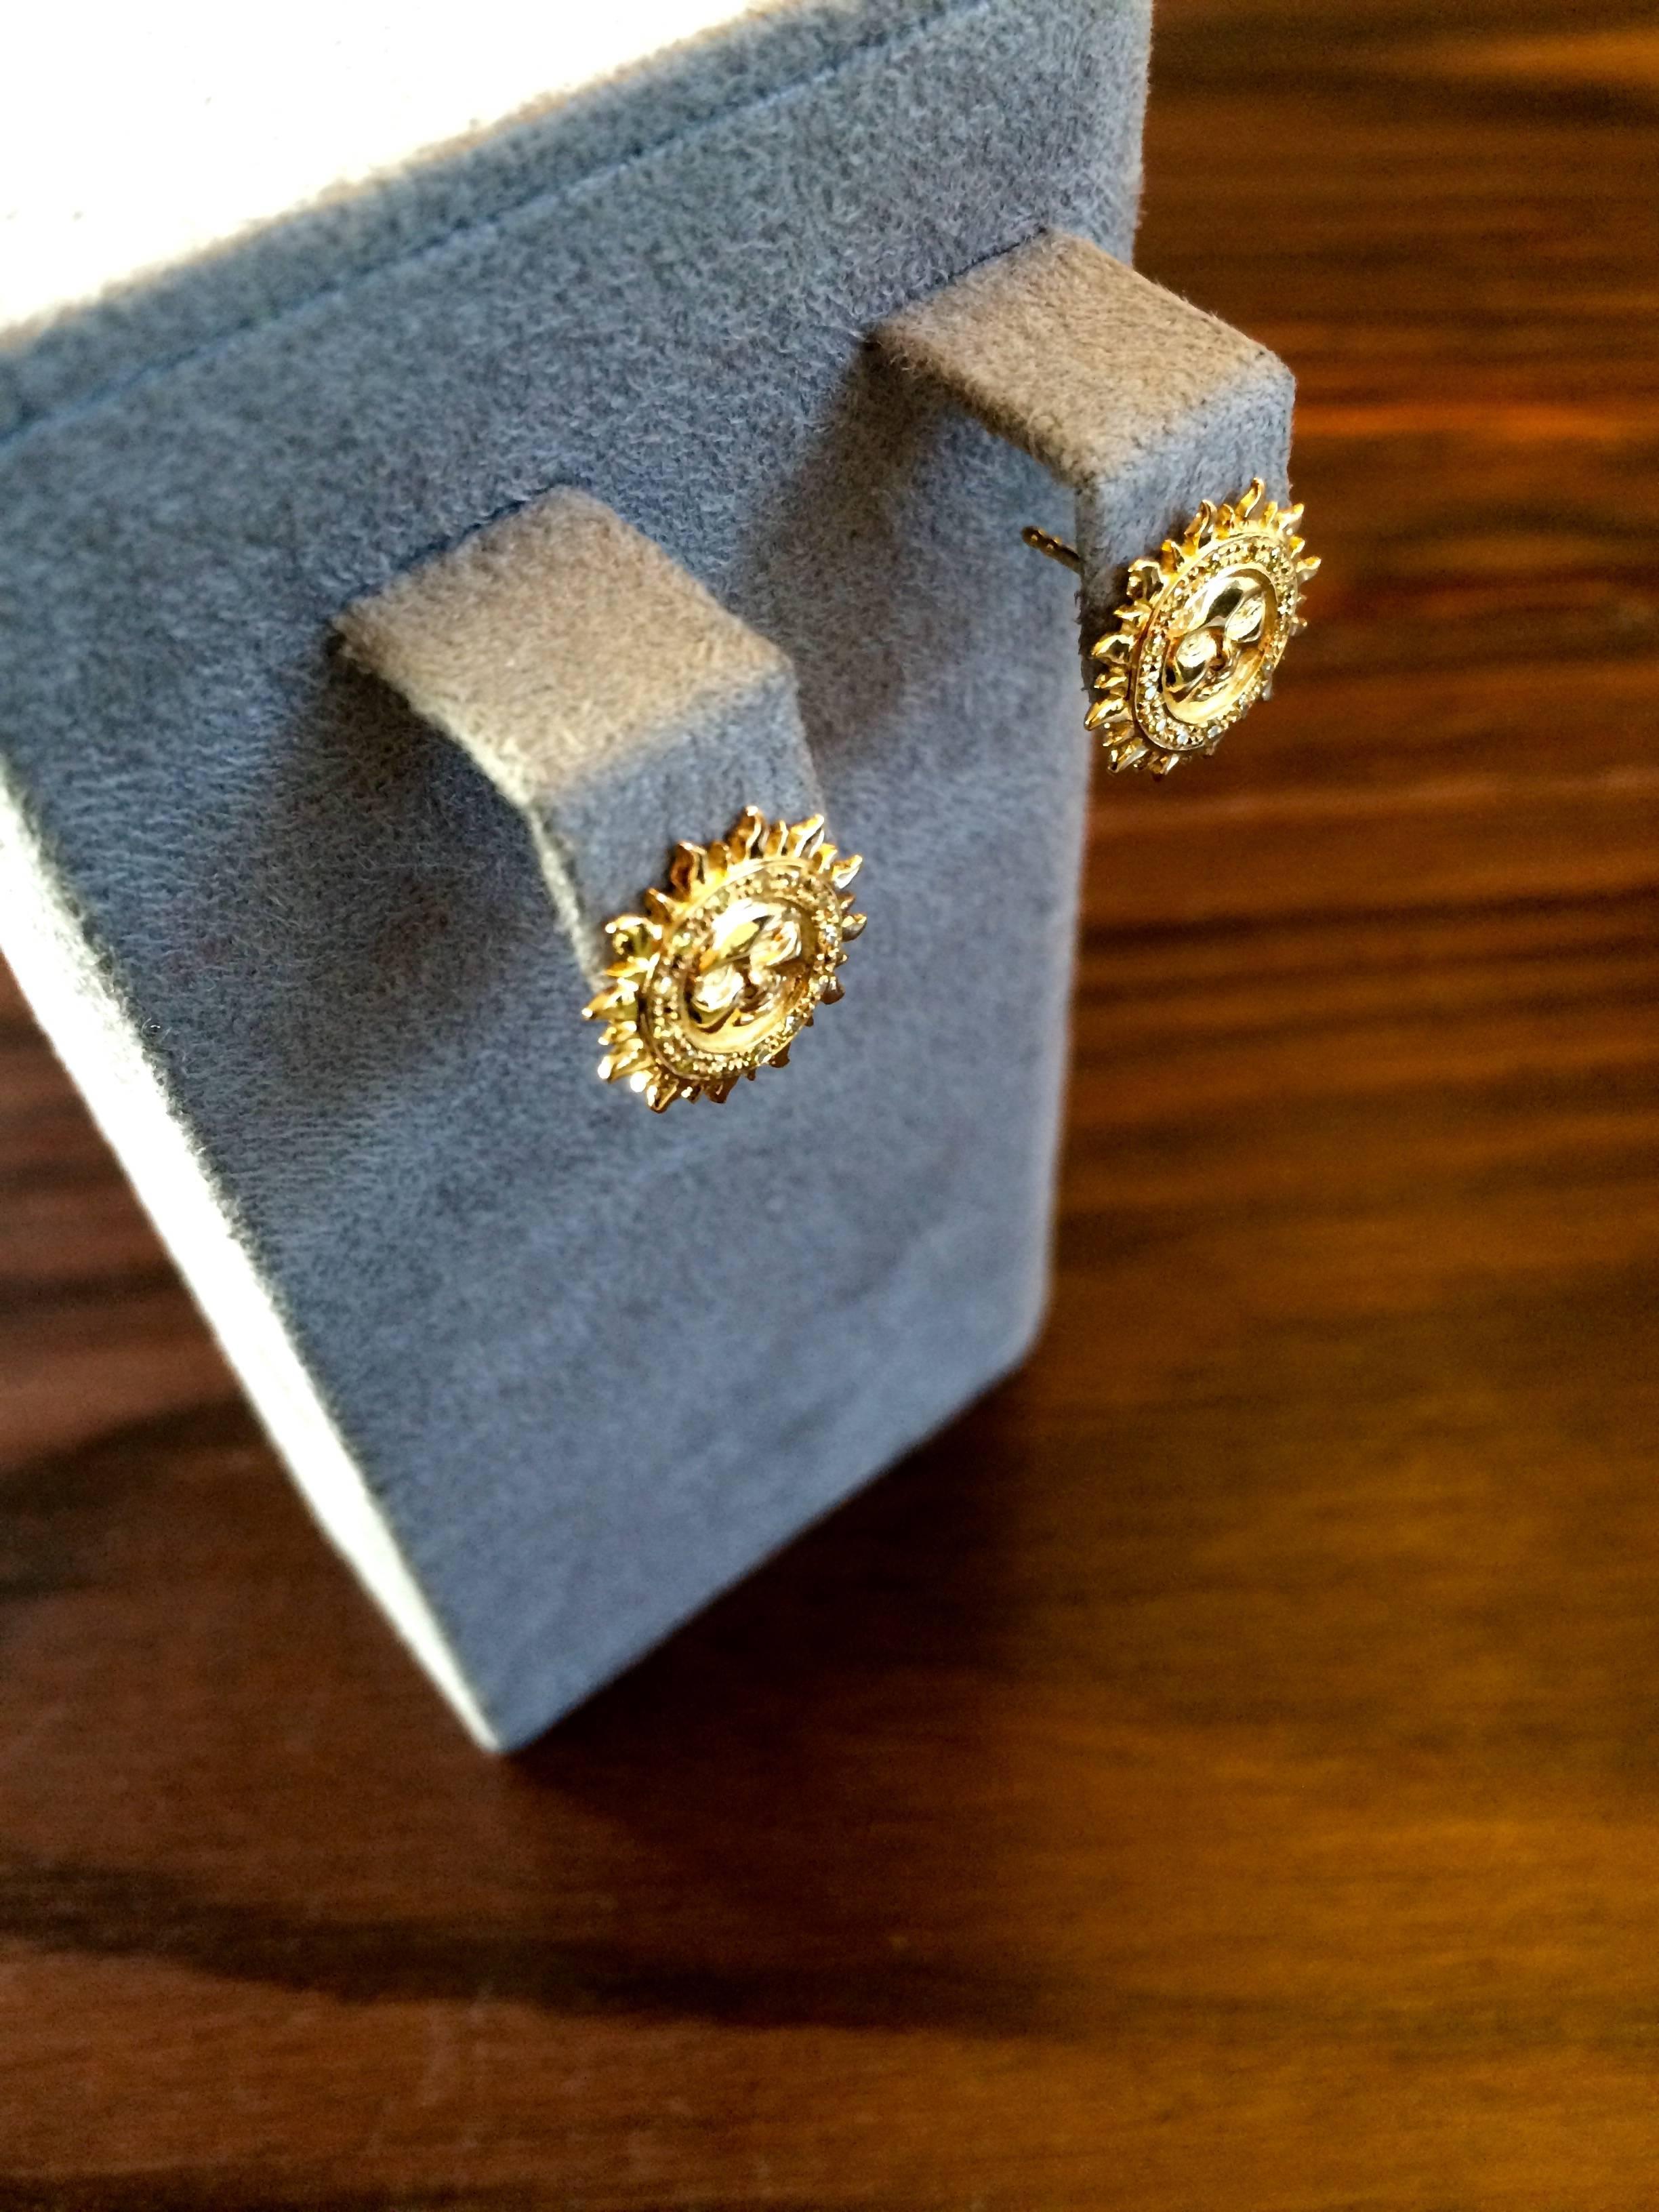 These beautiful studs are hand crafted in our London workshop and are pave set with the finest natural canary yellow diamonds. These total 0.30ct. 

Diameter: 1cm

The studs are for pierced ears and have a scroll back fitting. 

They are made to